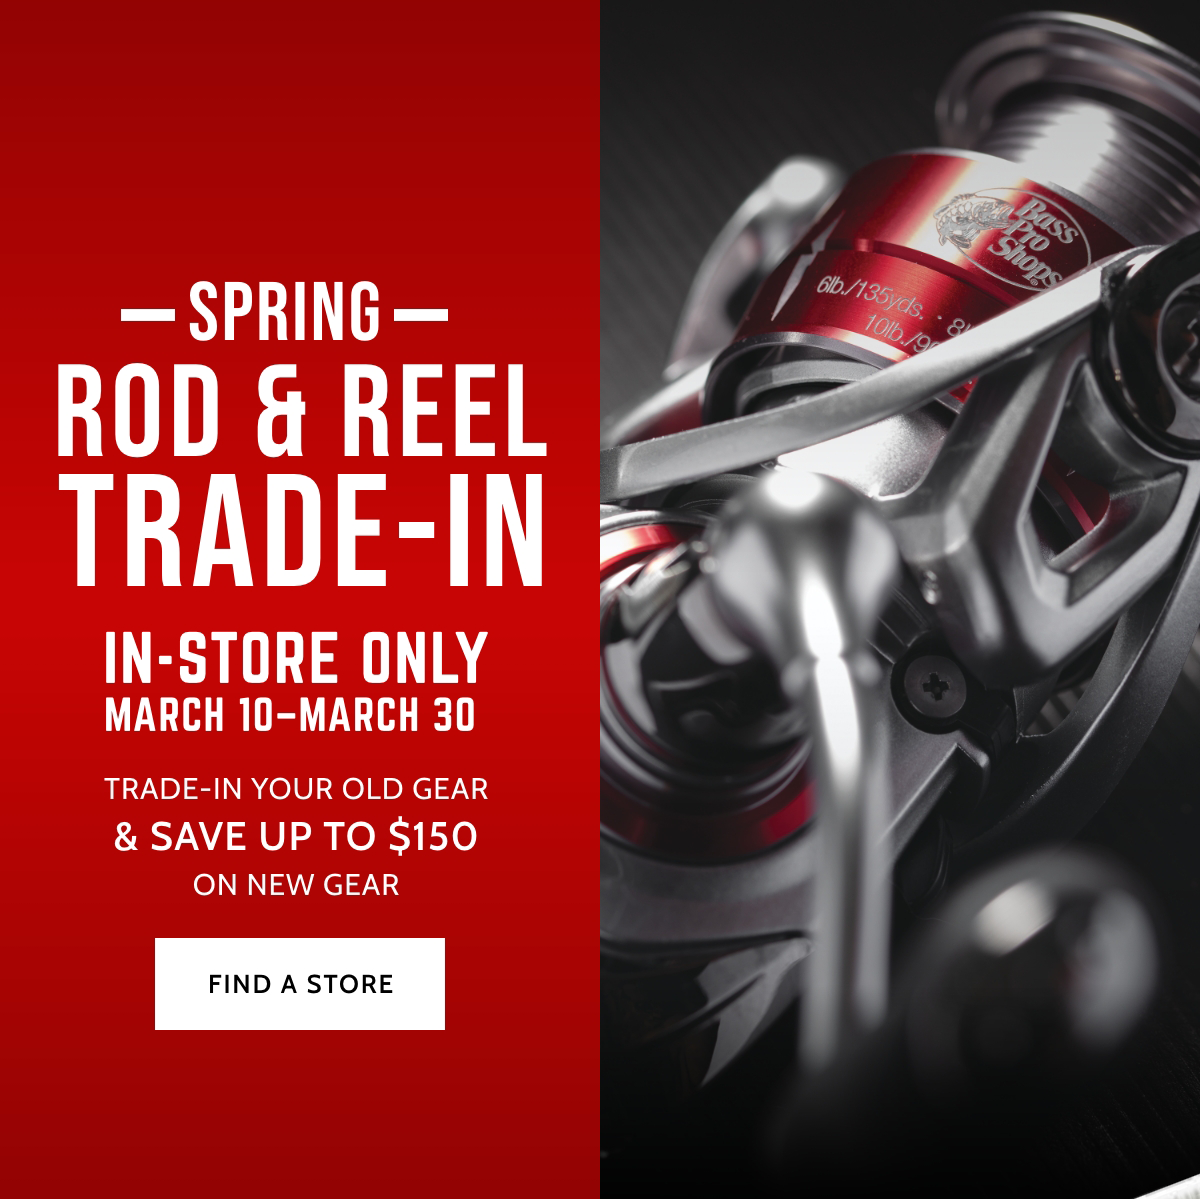 Bass Pro Shops: Rod & Reel Trade-In at Your Local Bass Pro Shops